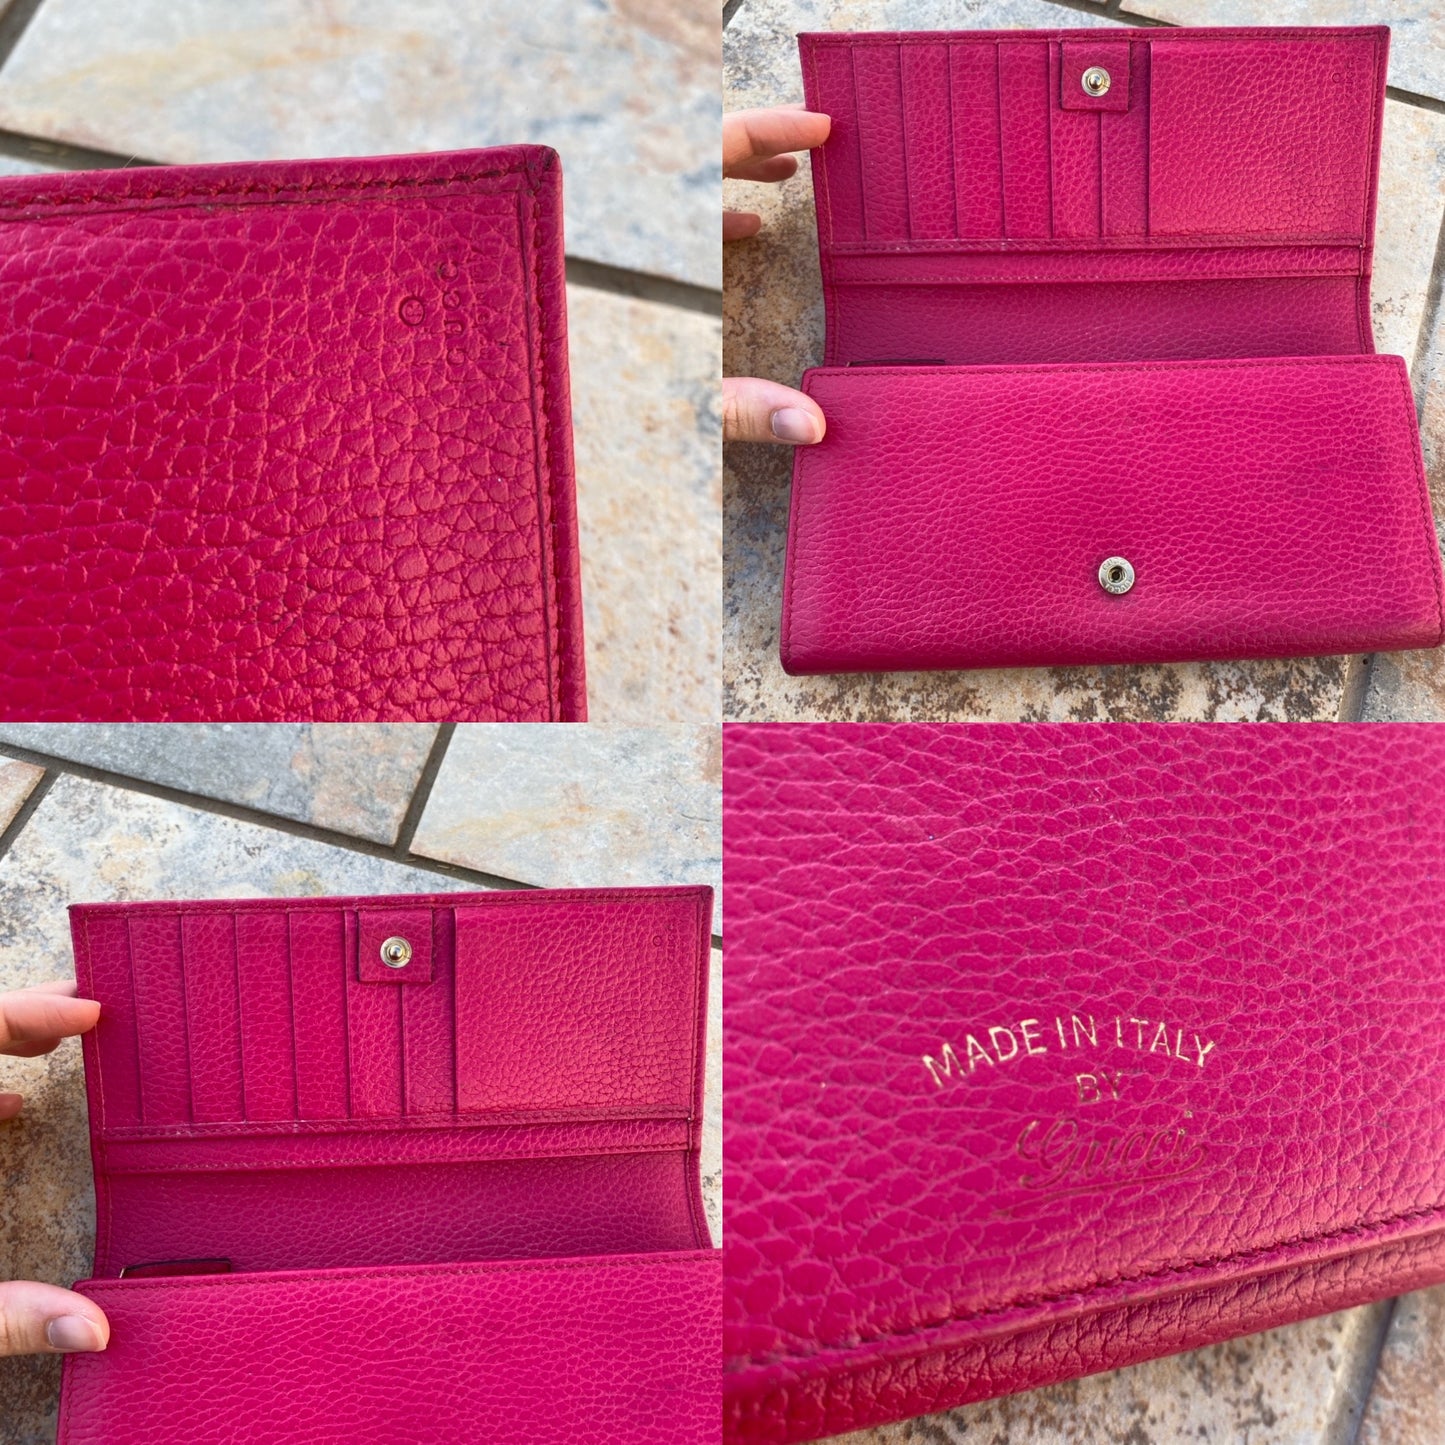 Gucci Swing Leather Continental Wallet